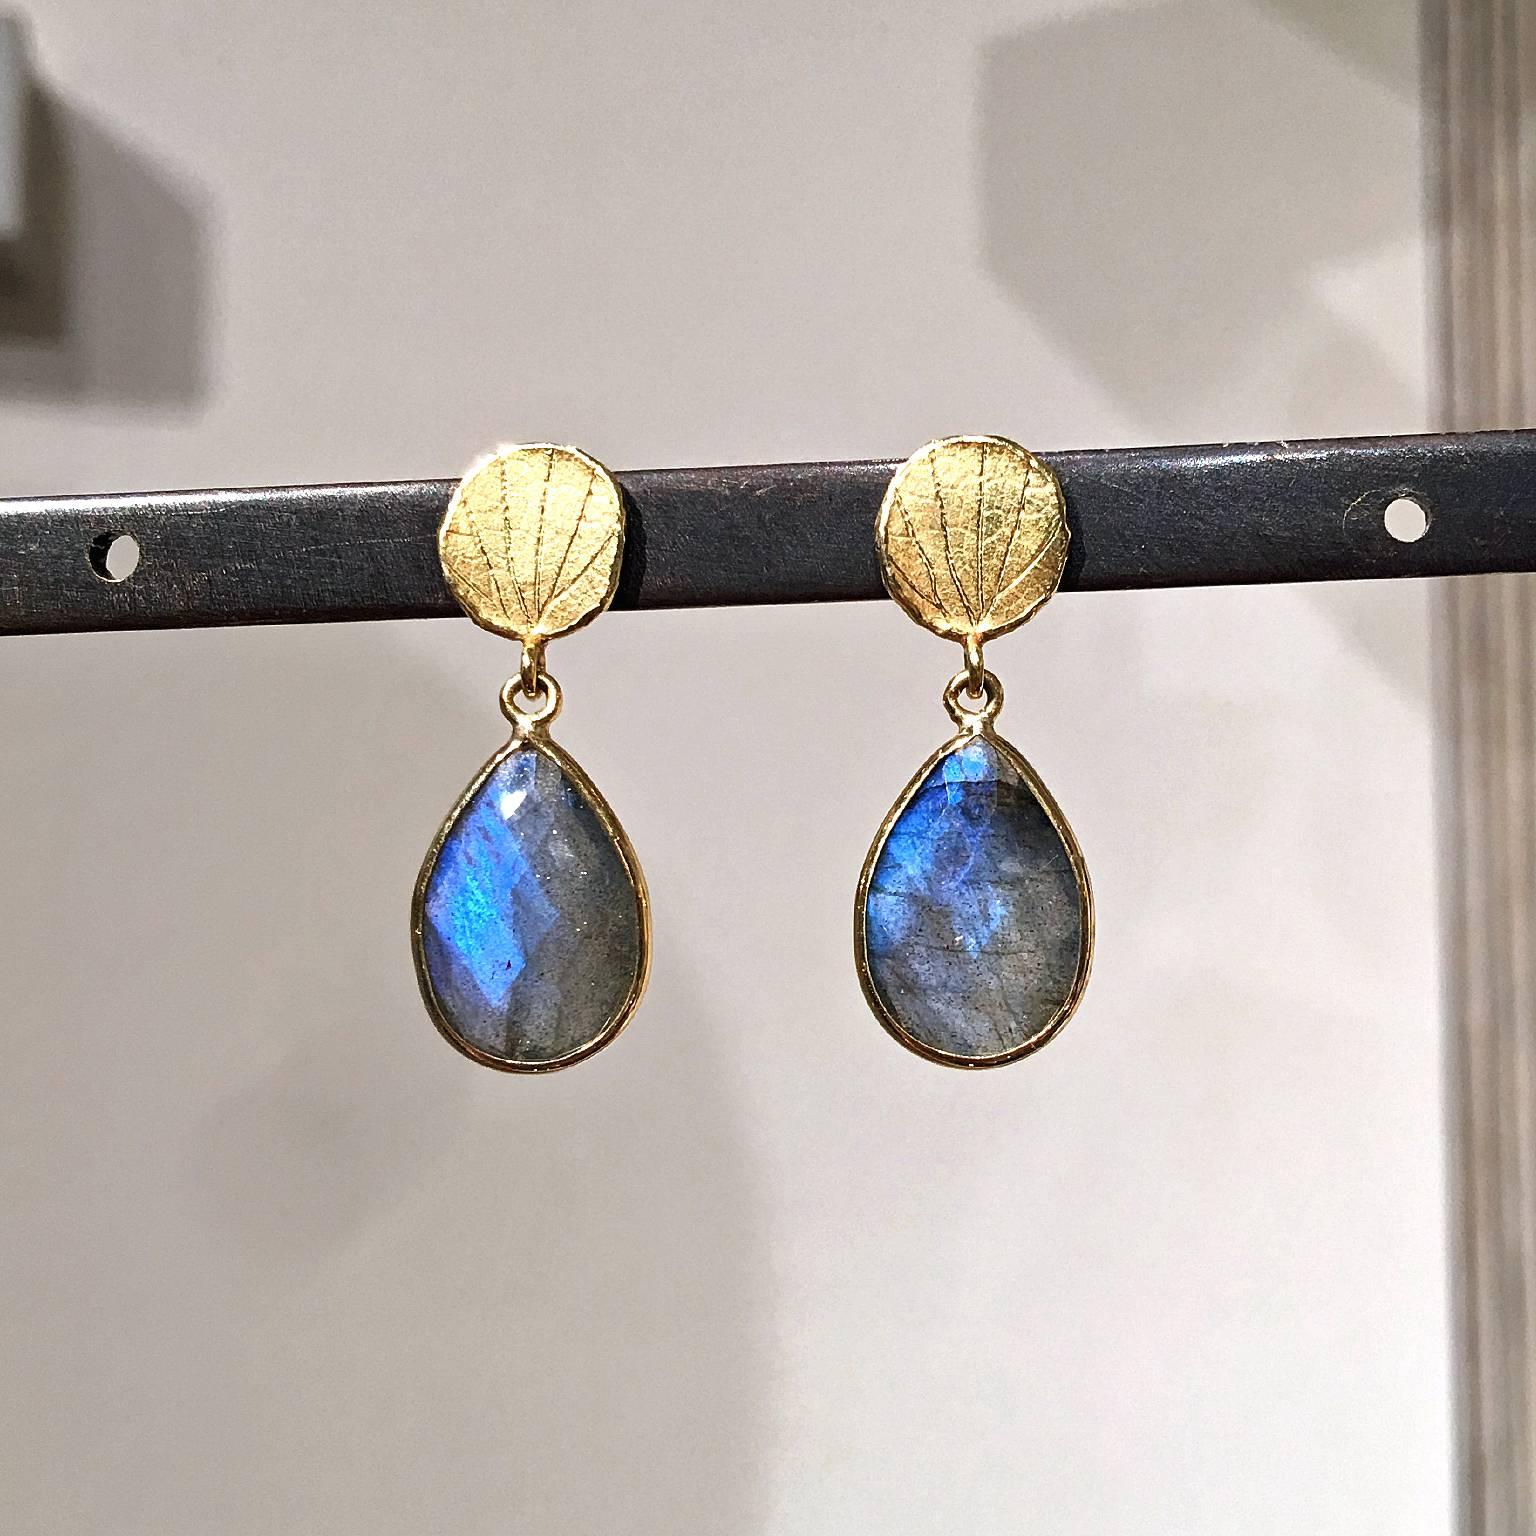 Dangle Earrings handcrafted by award winning jewelry artist Barbara Heinrich featuring a pair of faceted labradorite with beautiful, strong colorplay, bezel-set in polished 18k yellow gold and attached to signature matte-finished 18k yellow gold